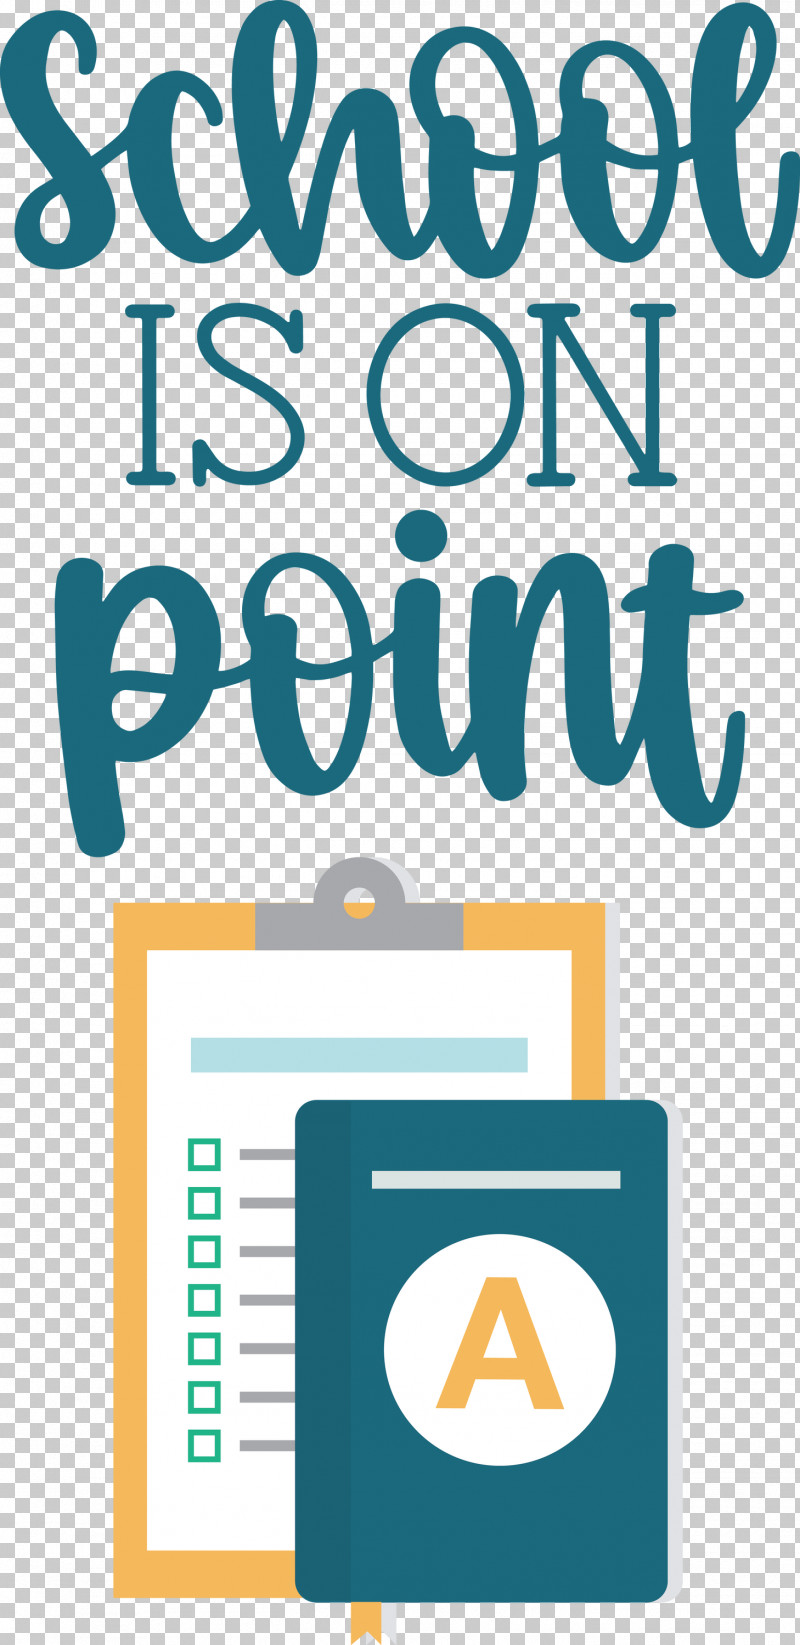 School Is On Point School Education PNG, Clipart, Calligraphy, Cartoon, Drawing, Education, Logo Free PNG Download